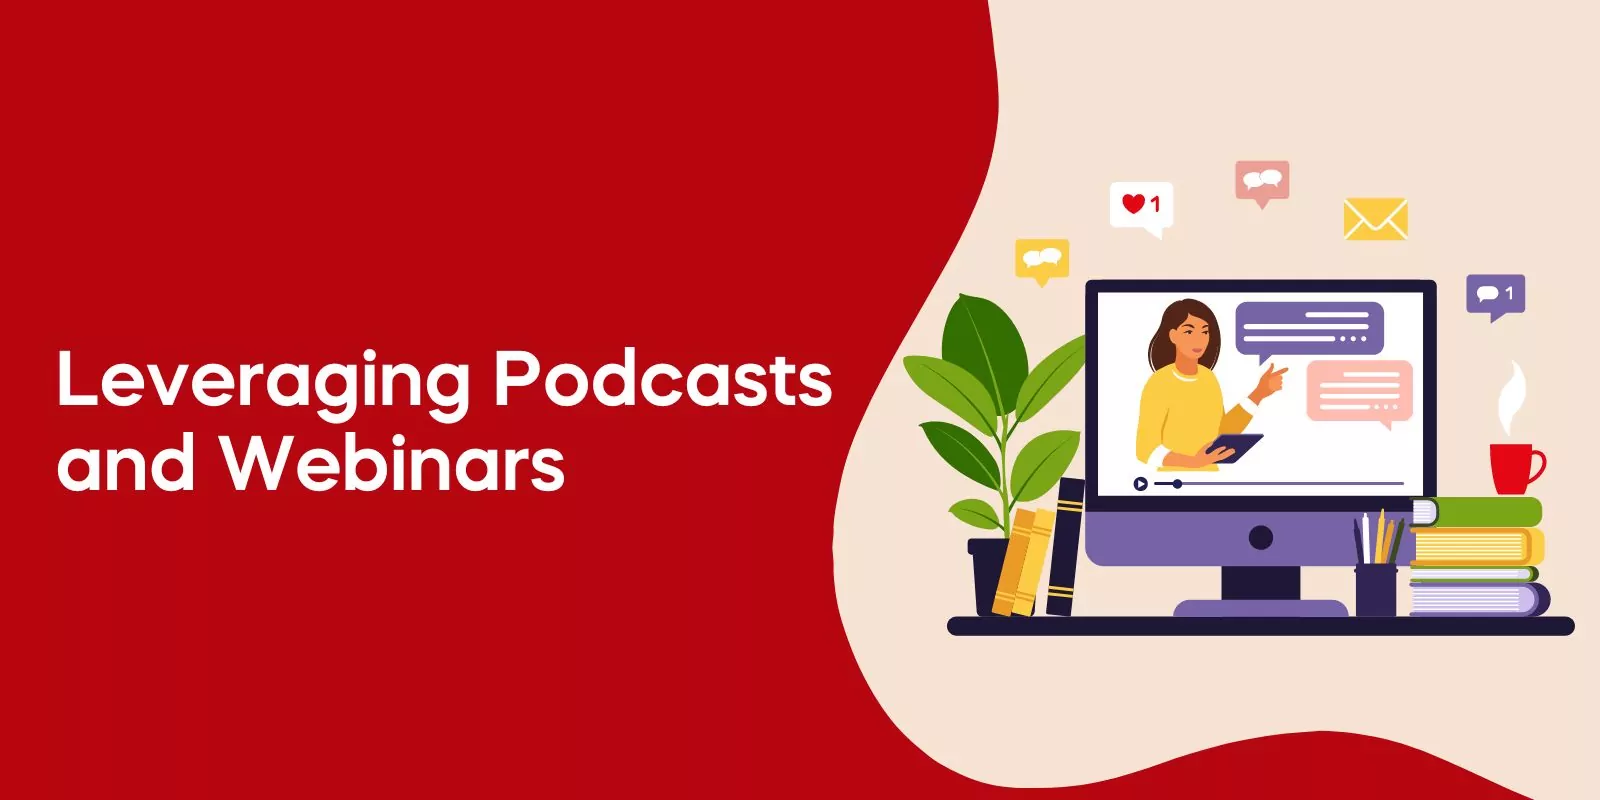 Leveraging Podcasts and Webinars